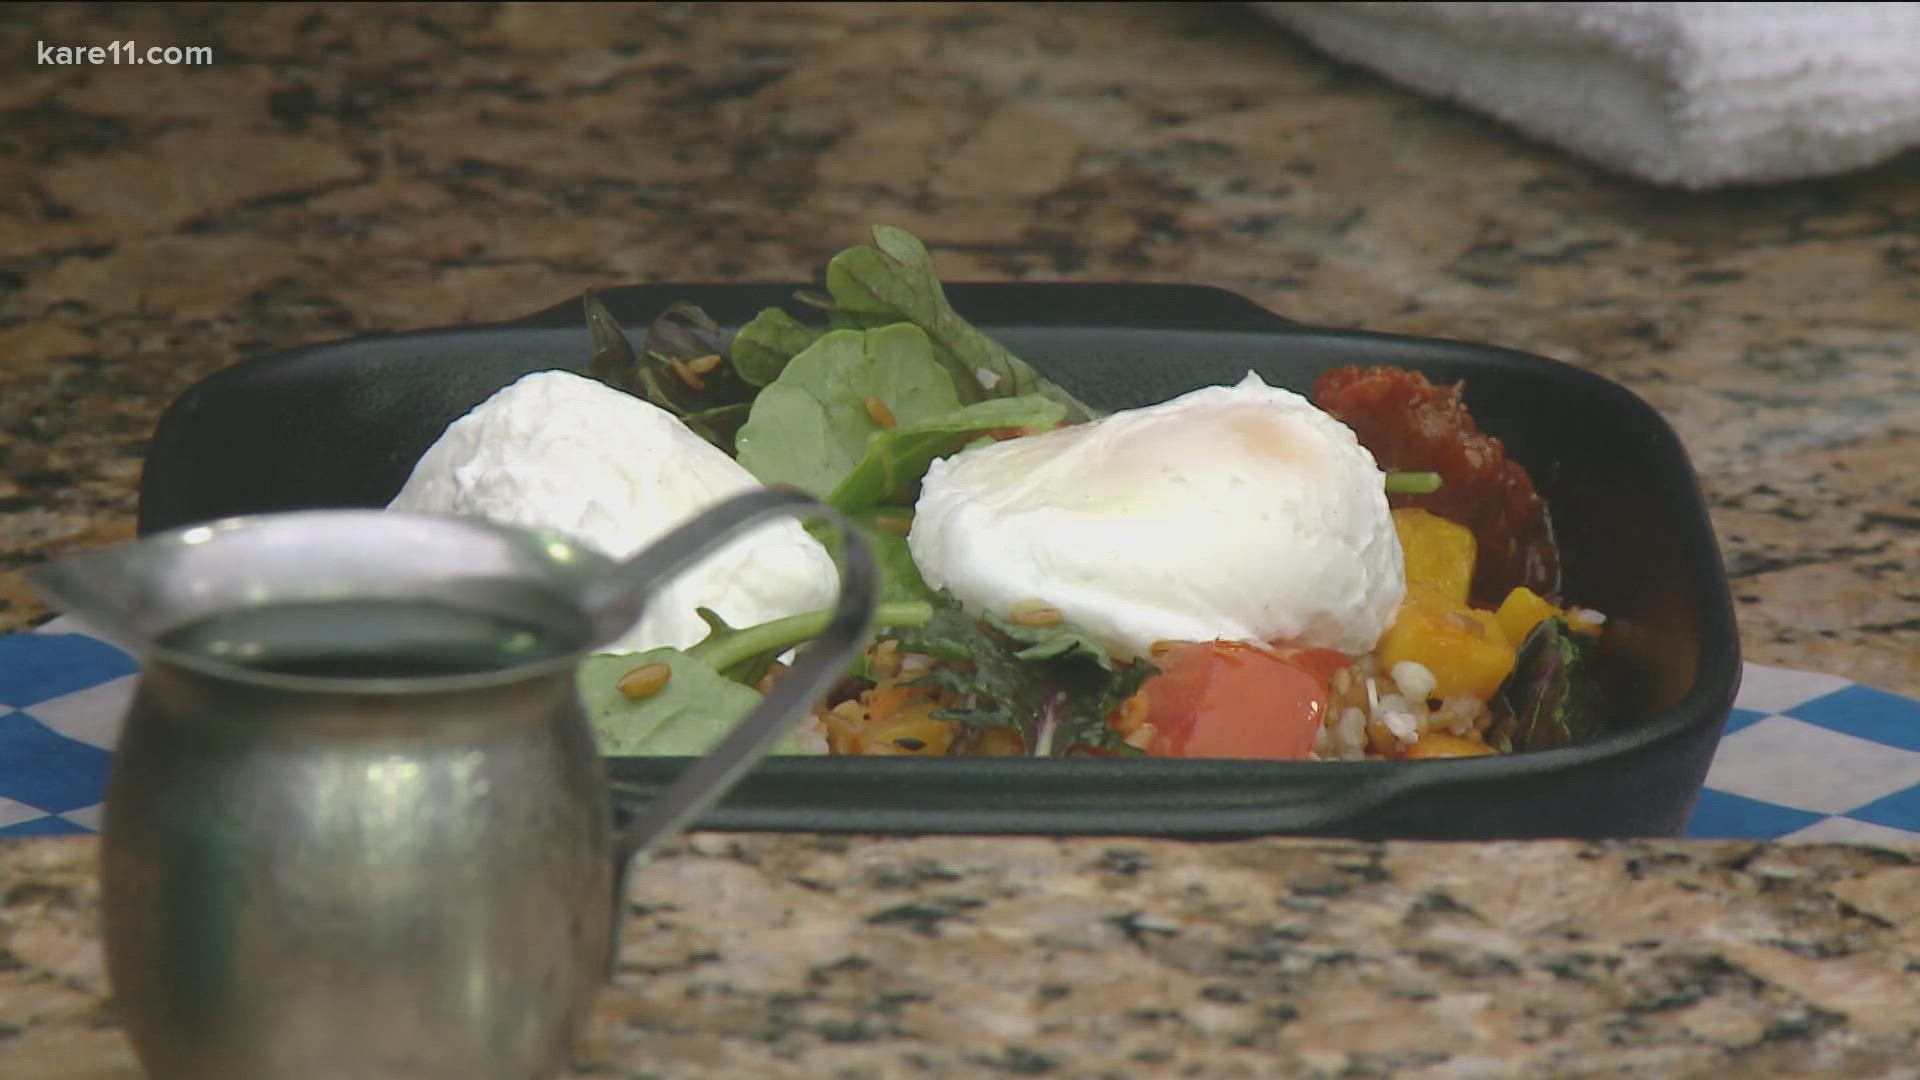 Executive Chef Kris Koch demonstrated a fresh breakfast bowl recipe with lots of in-season fall produce.